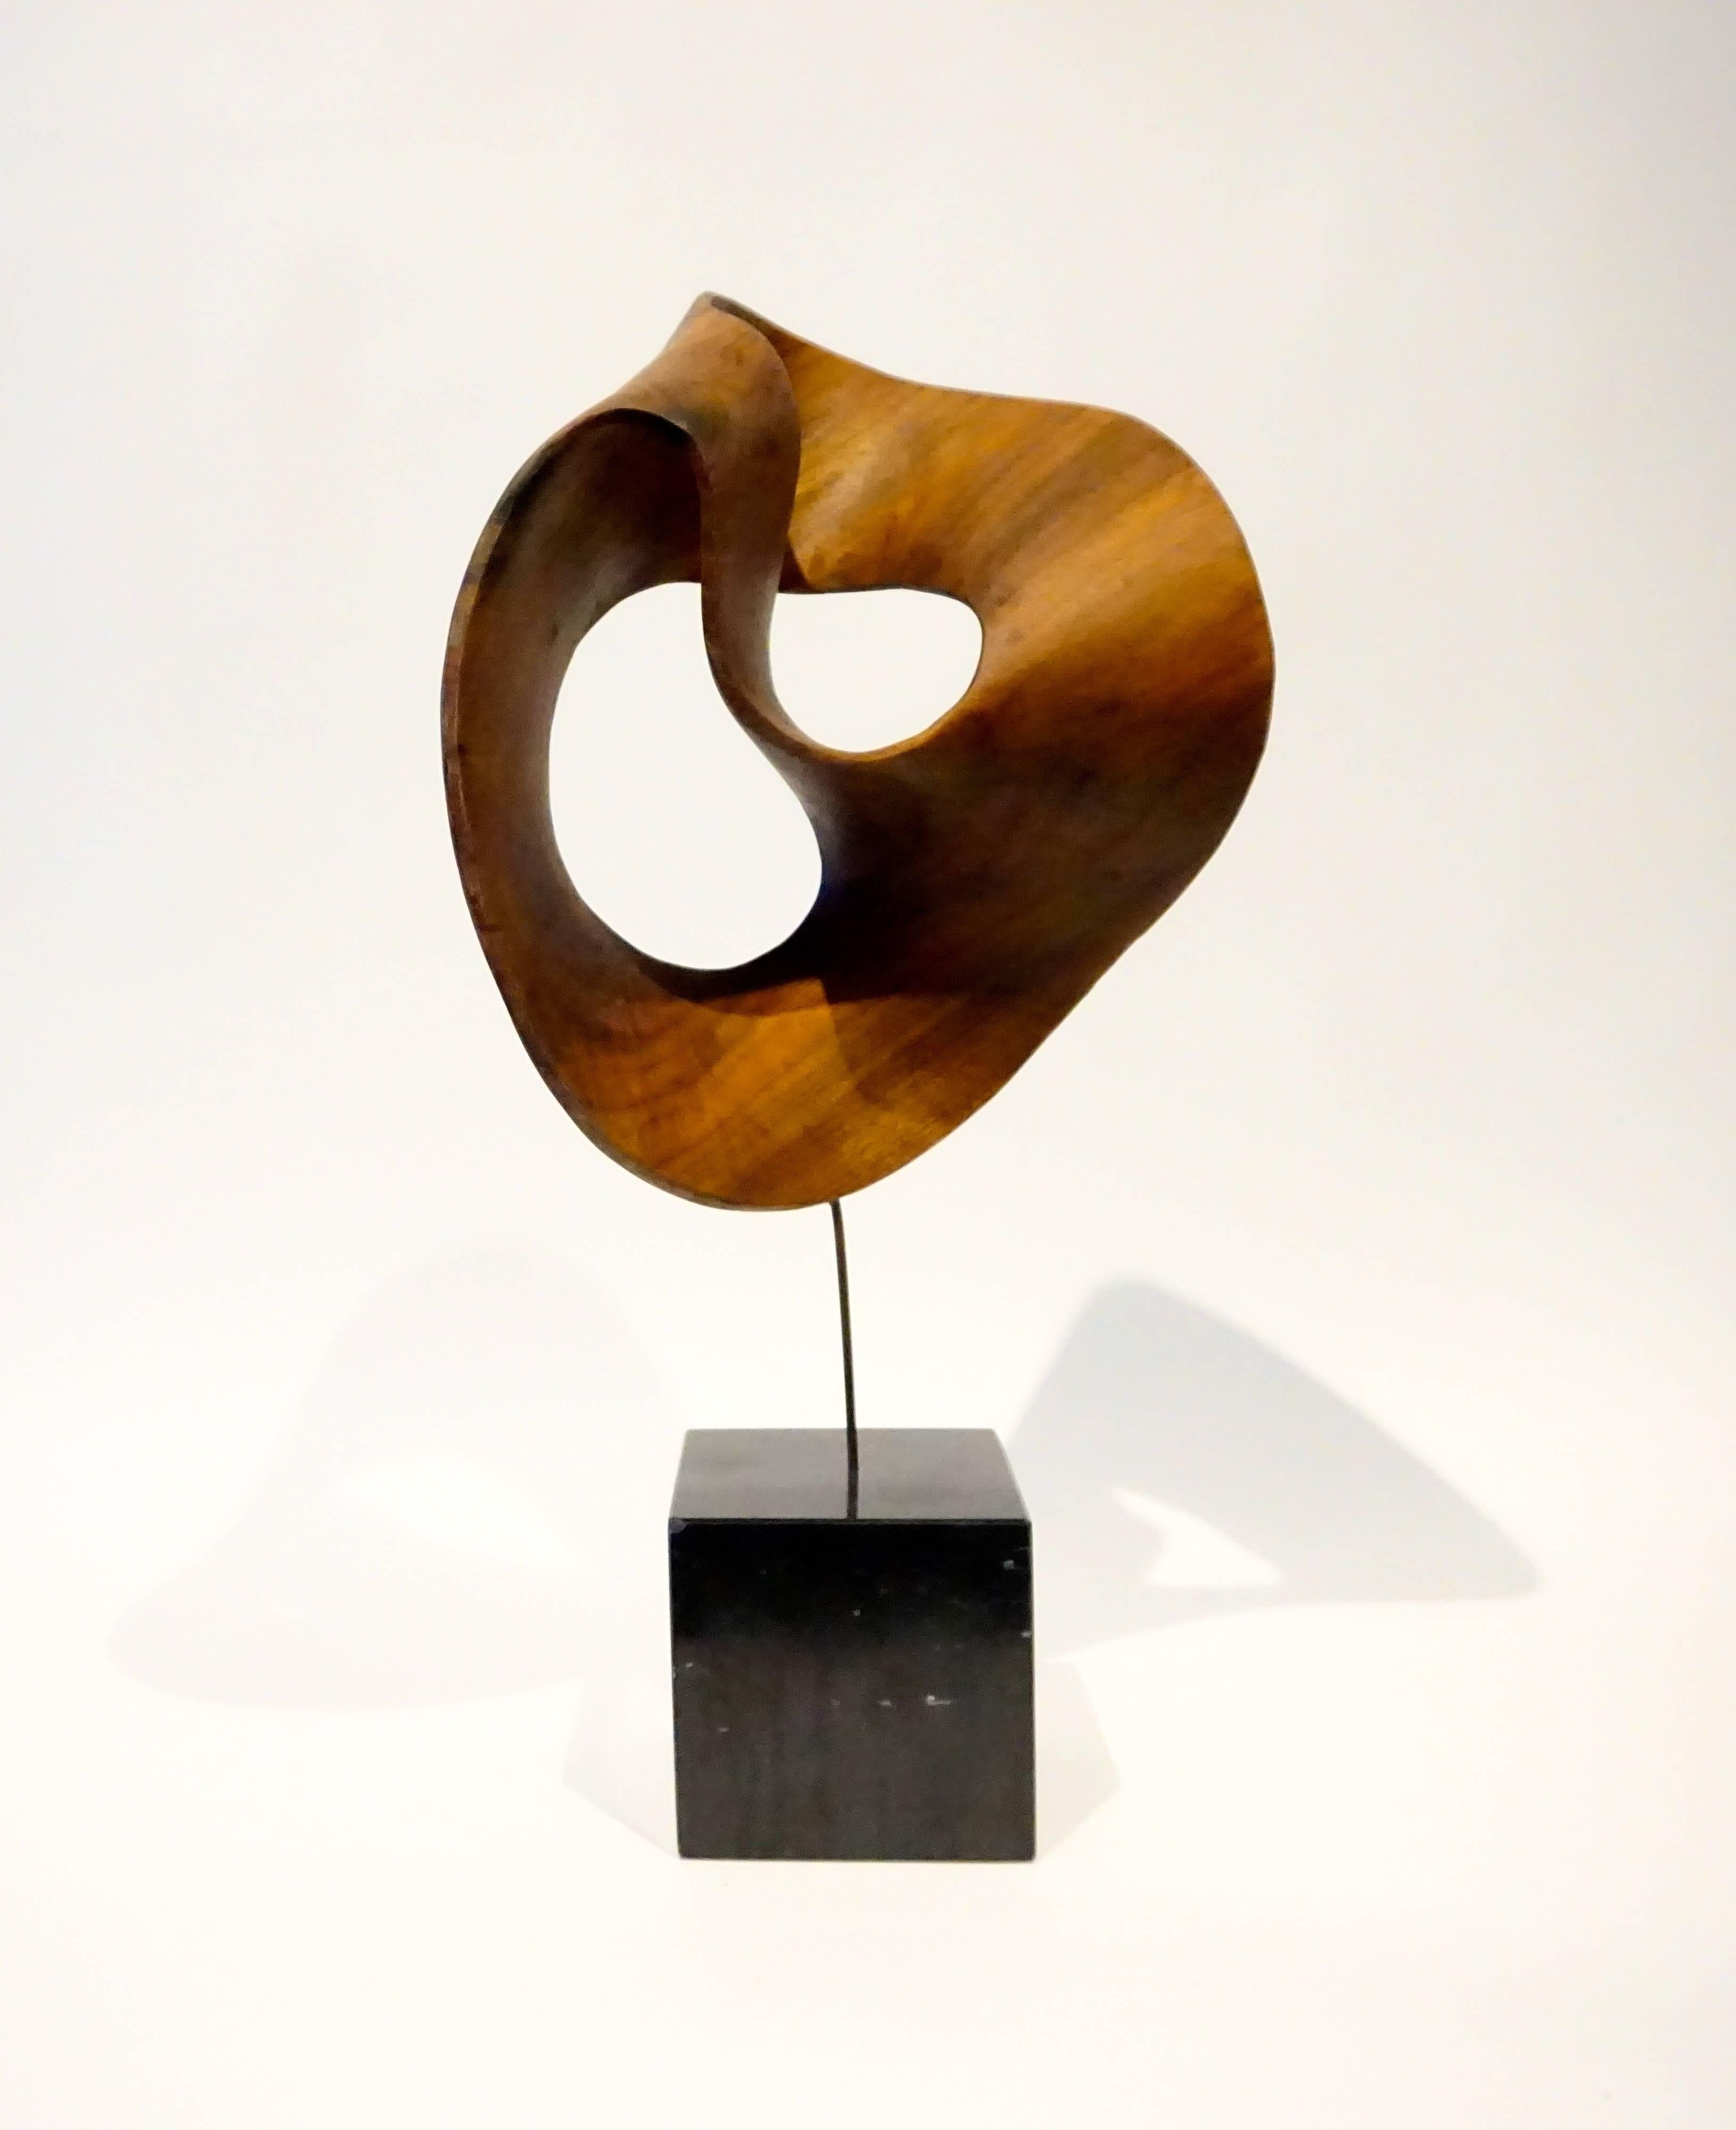 A carved wooden swirl sculpture by American artist Thomas E. Woodward (1932 - 2011) from the 1990s. Woodward was a Yale graduate and an architect by training, who in the 1990's began to sculpt using a variety of materials including marble, bronze